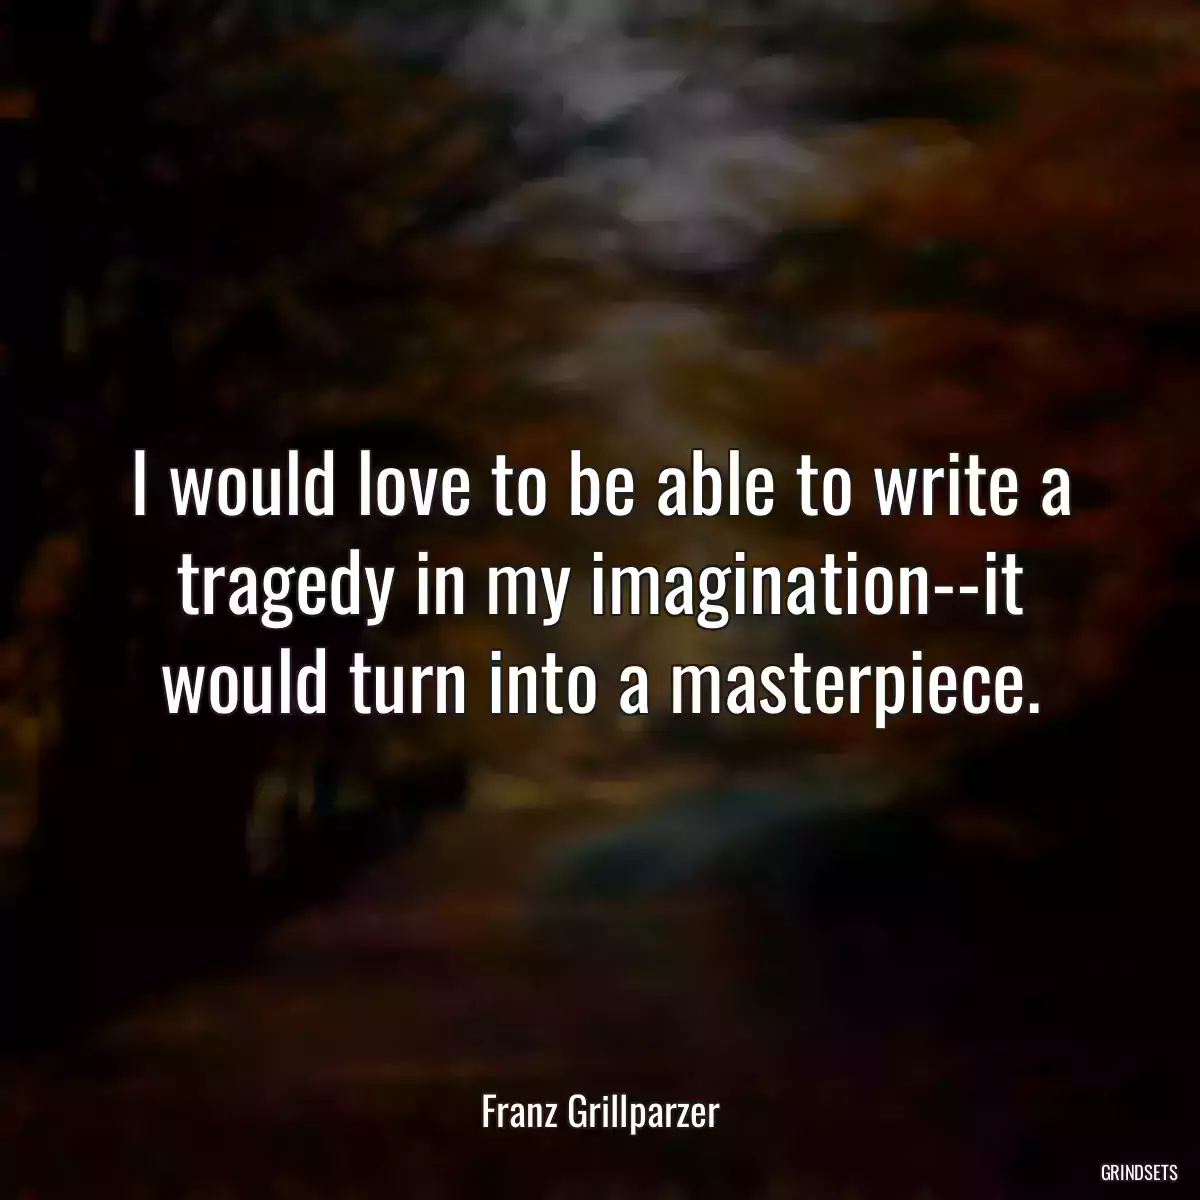 I would love to be able to write a tragedy in my imagination--it would turn into a masterpiece.